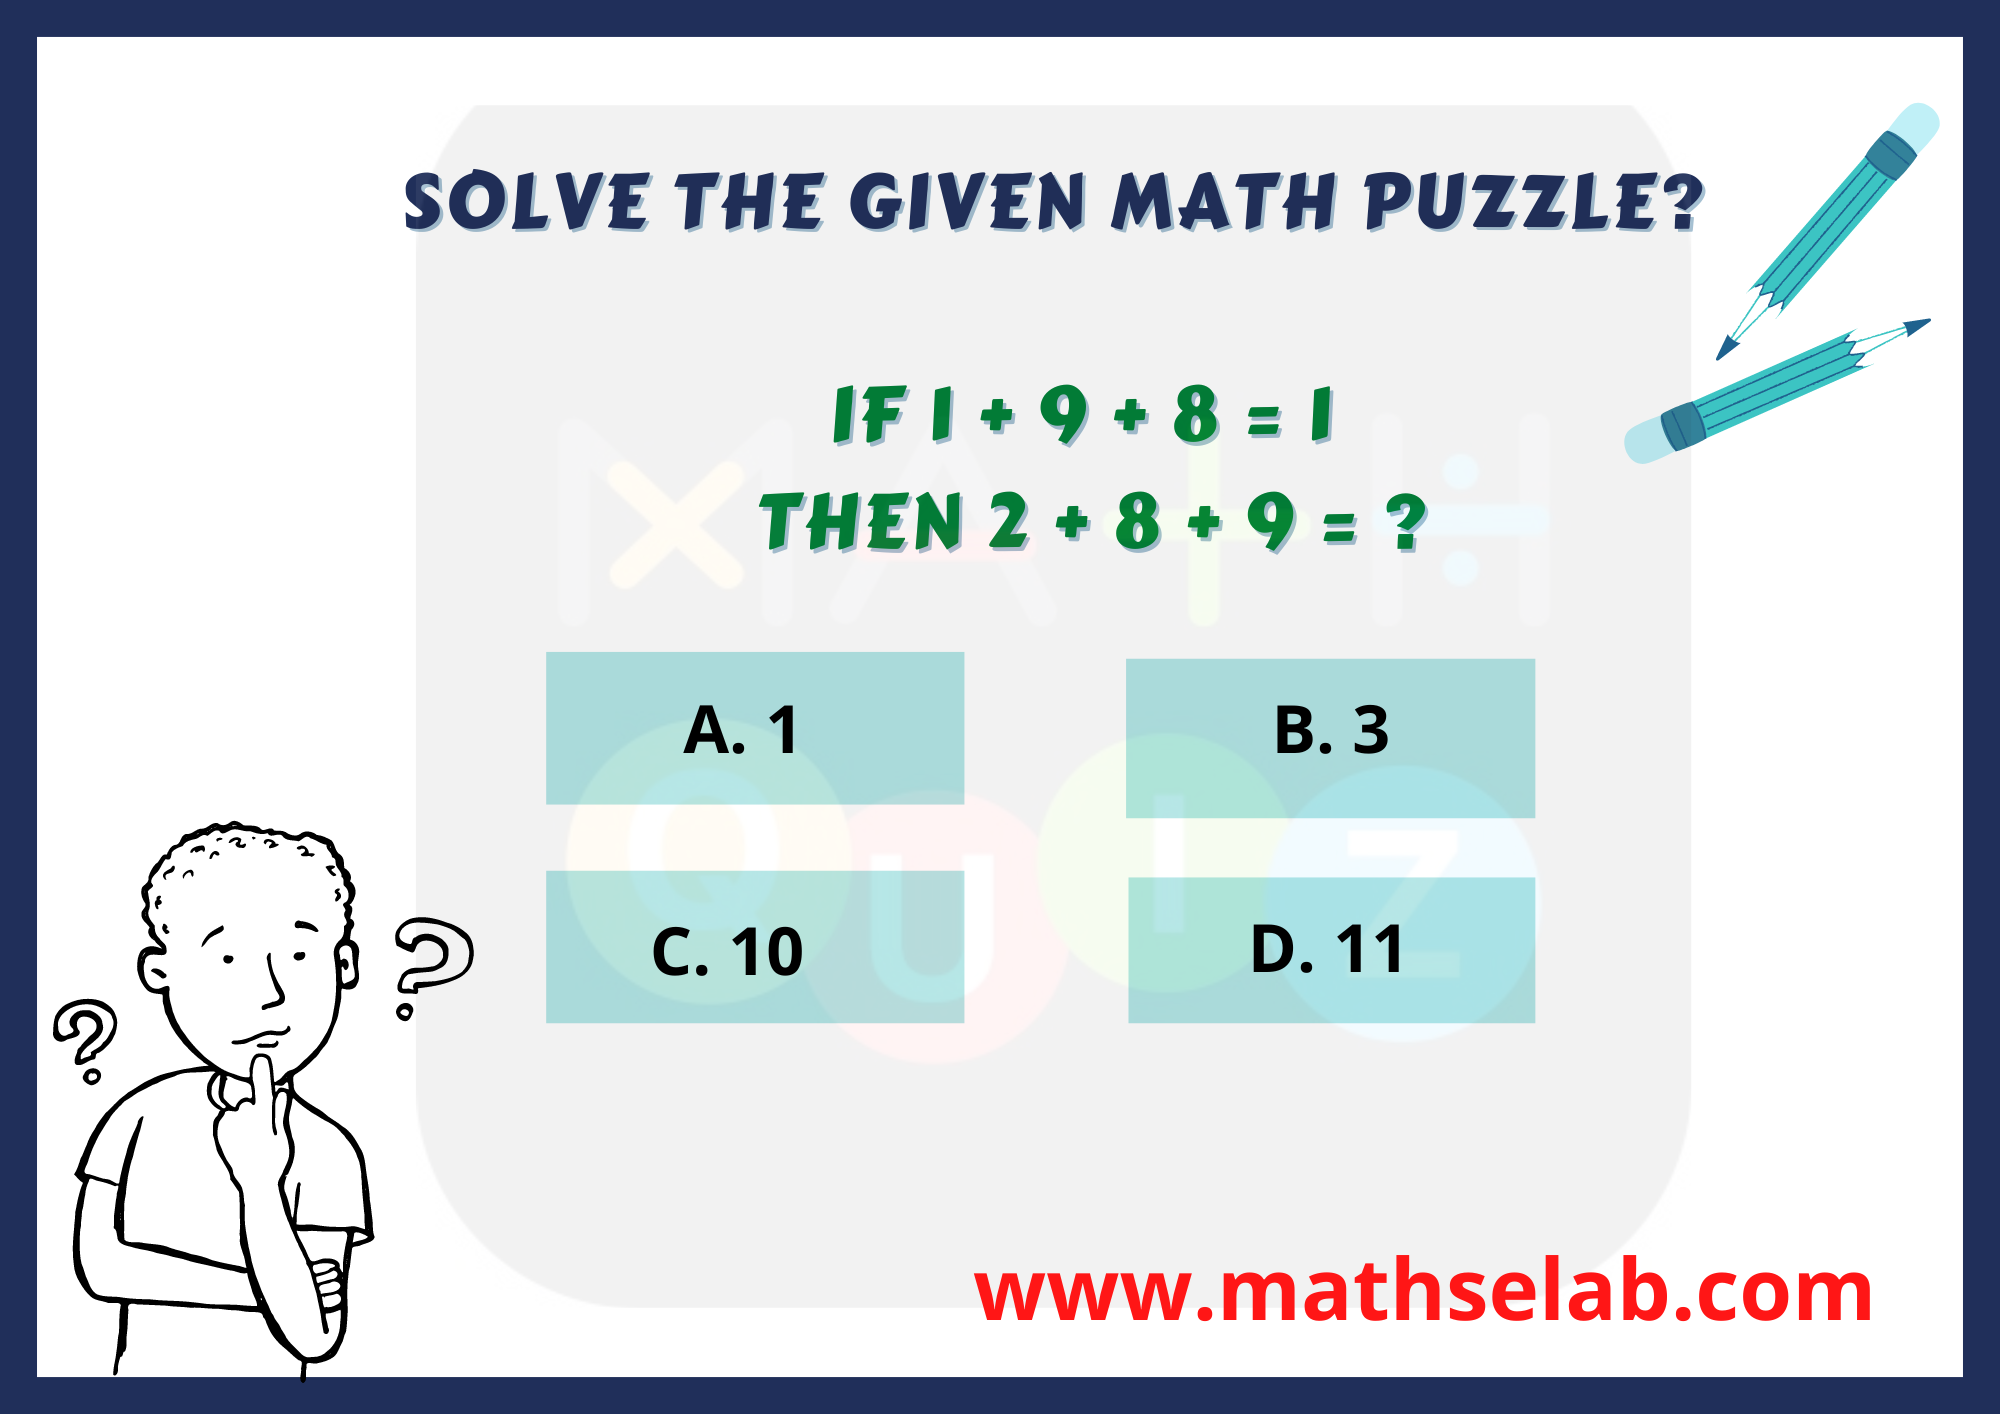 Solve the given math puzzle If 1 + 9 + 8 = 1 then 2 + 8 + 9 = - www.mathselab.com